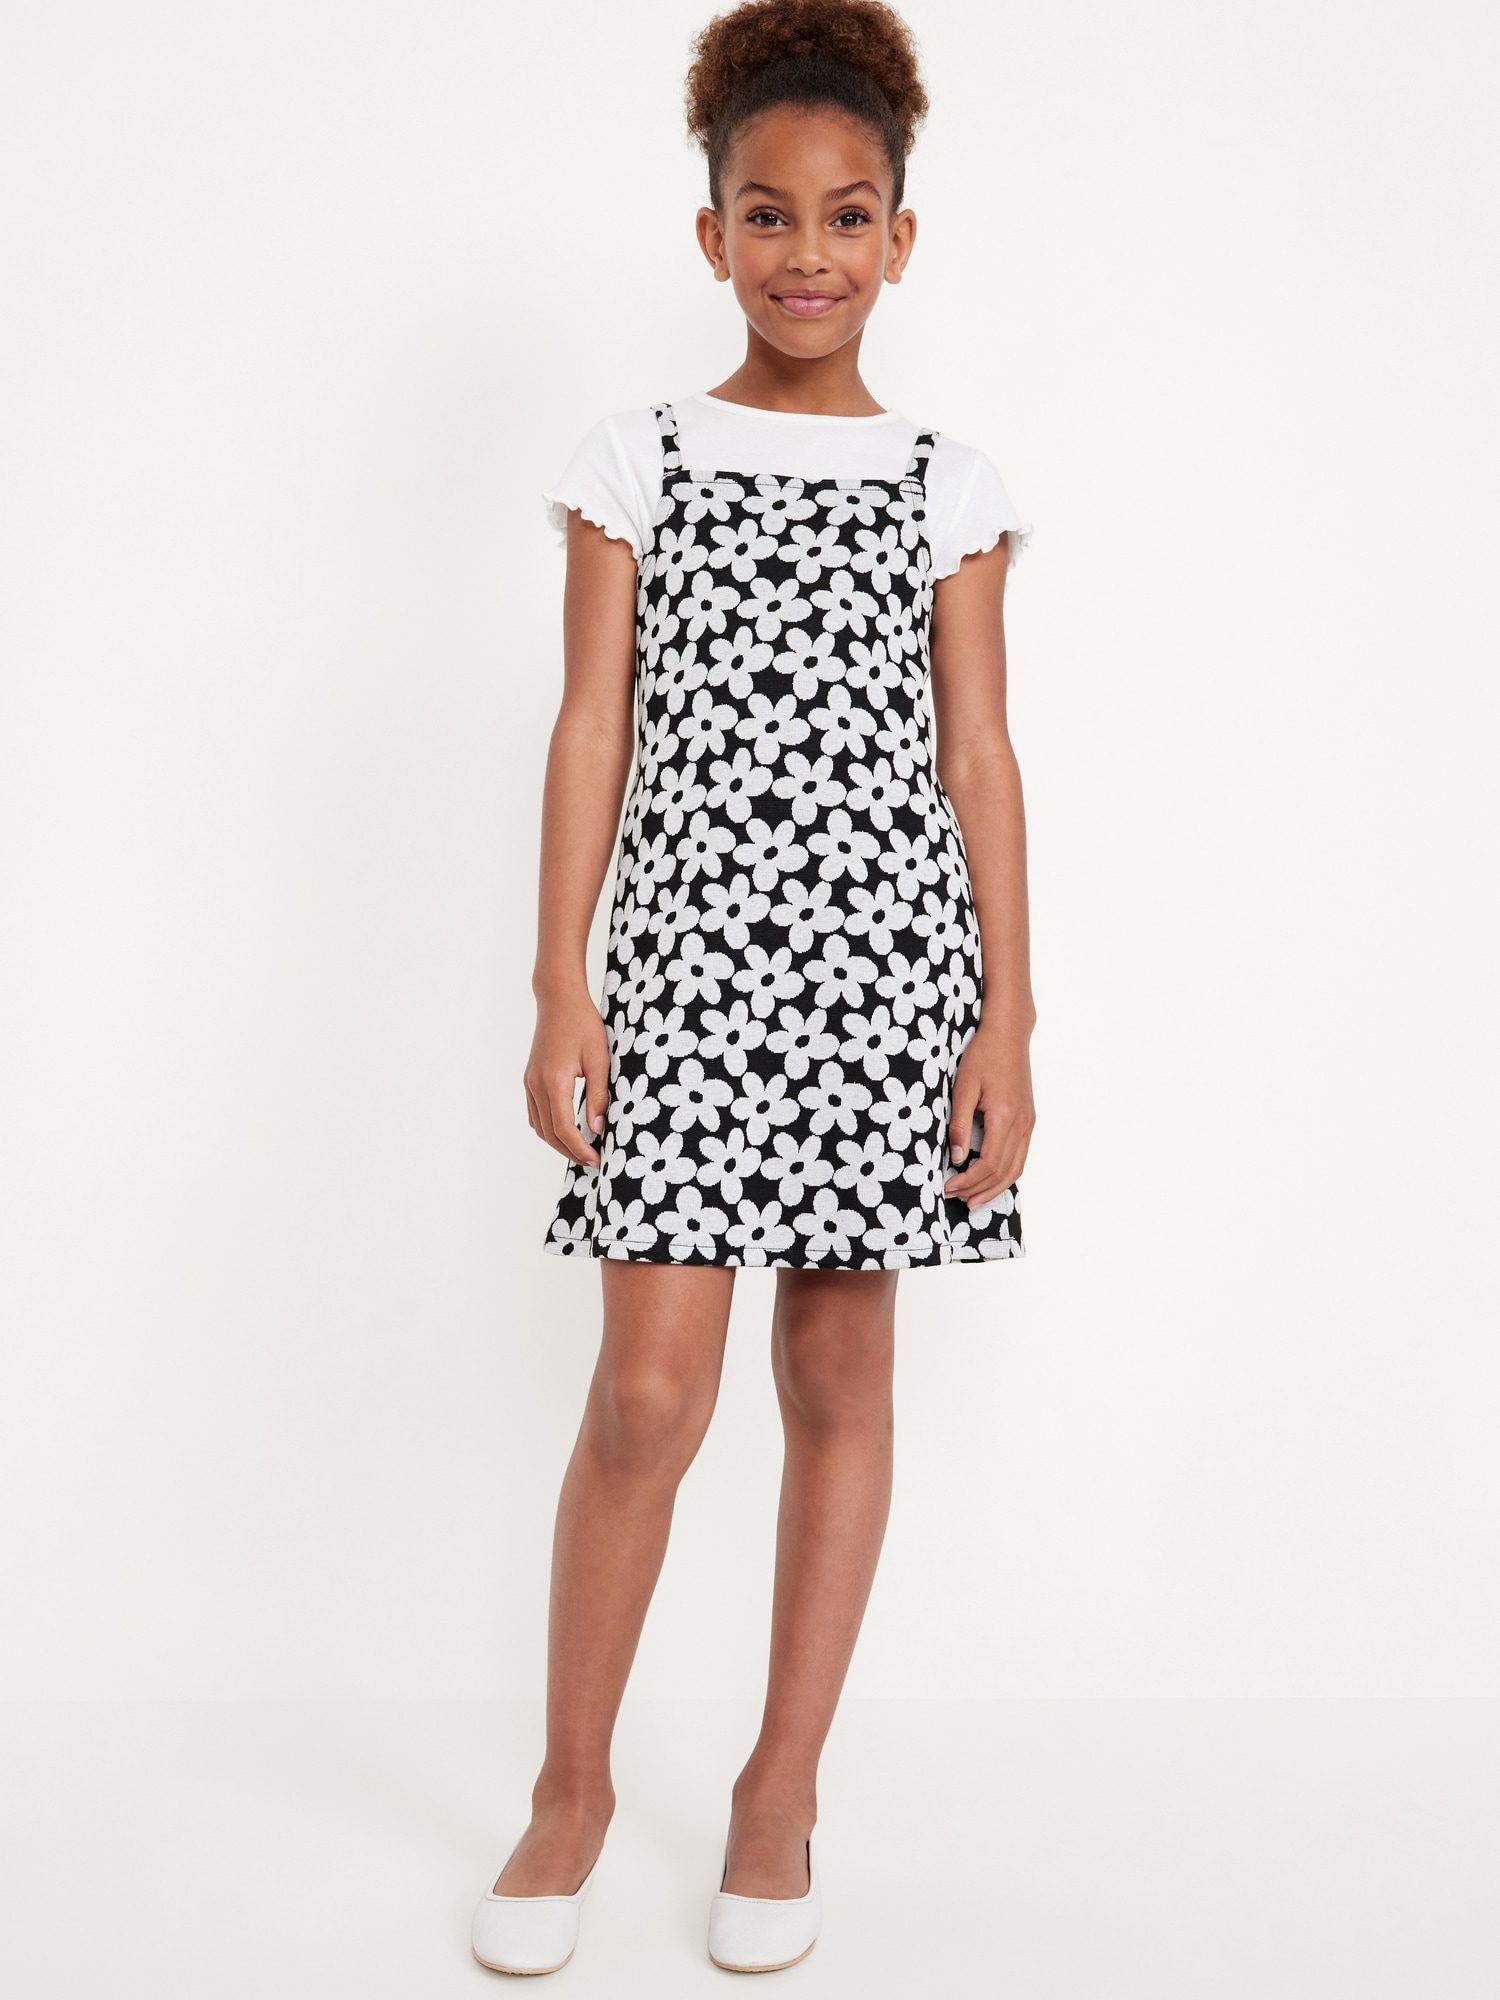 Sleeveless Fit and Flare Dress T-Shirt Set for Girls